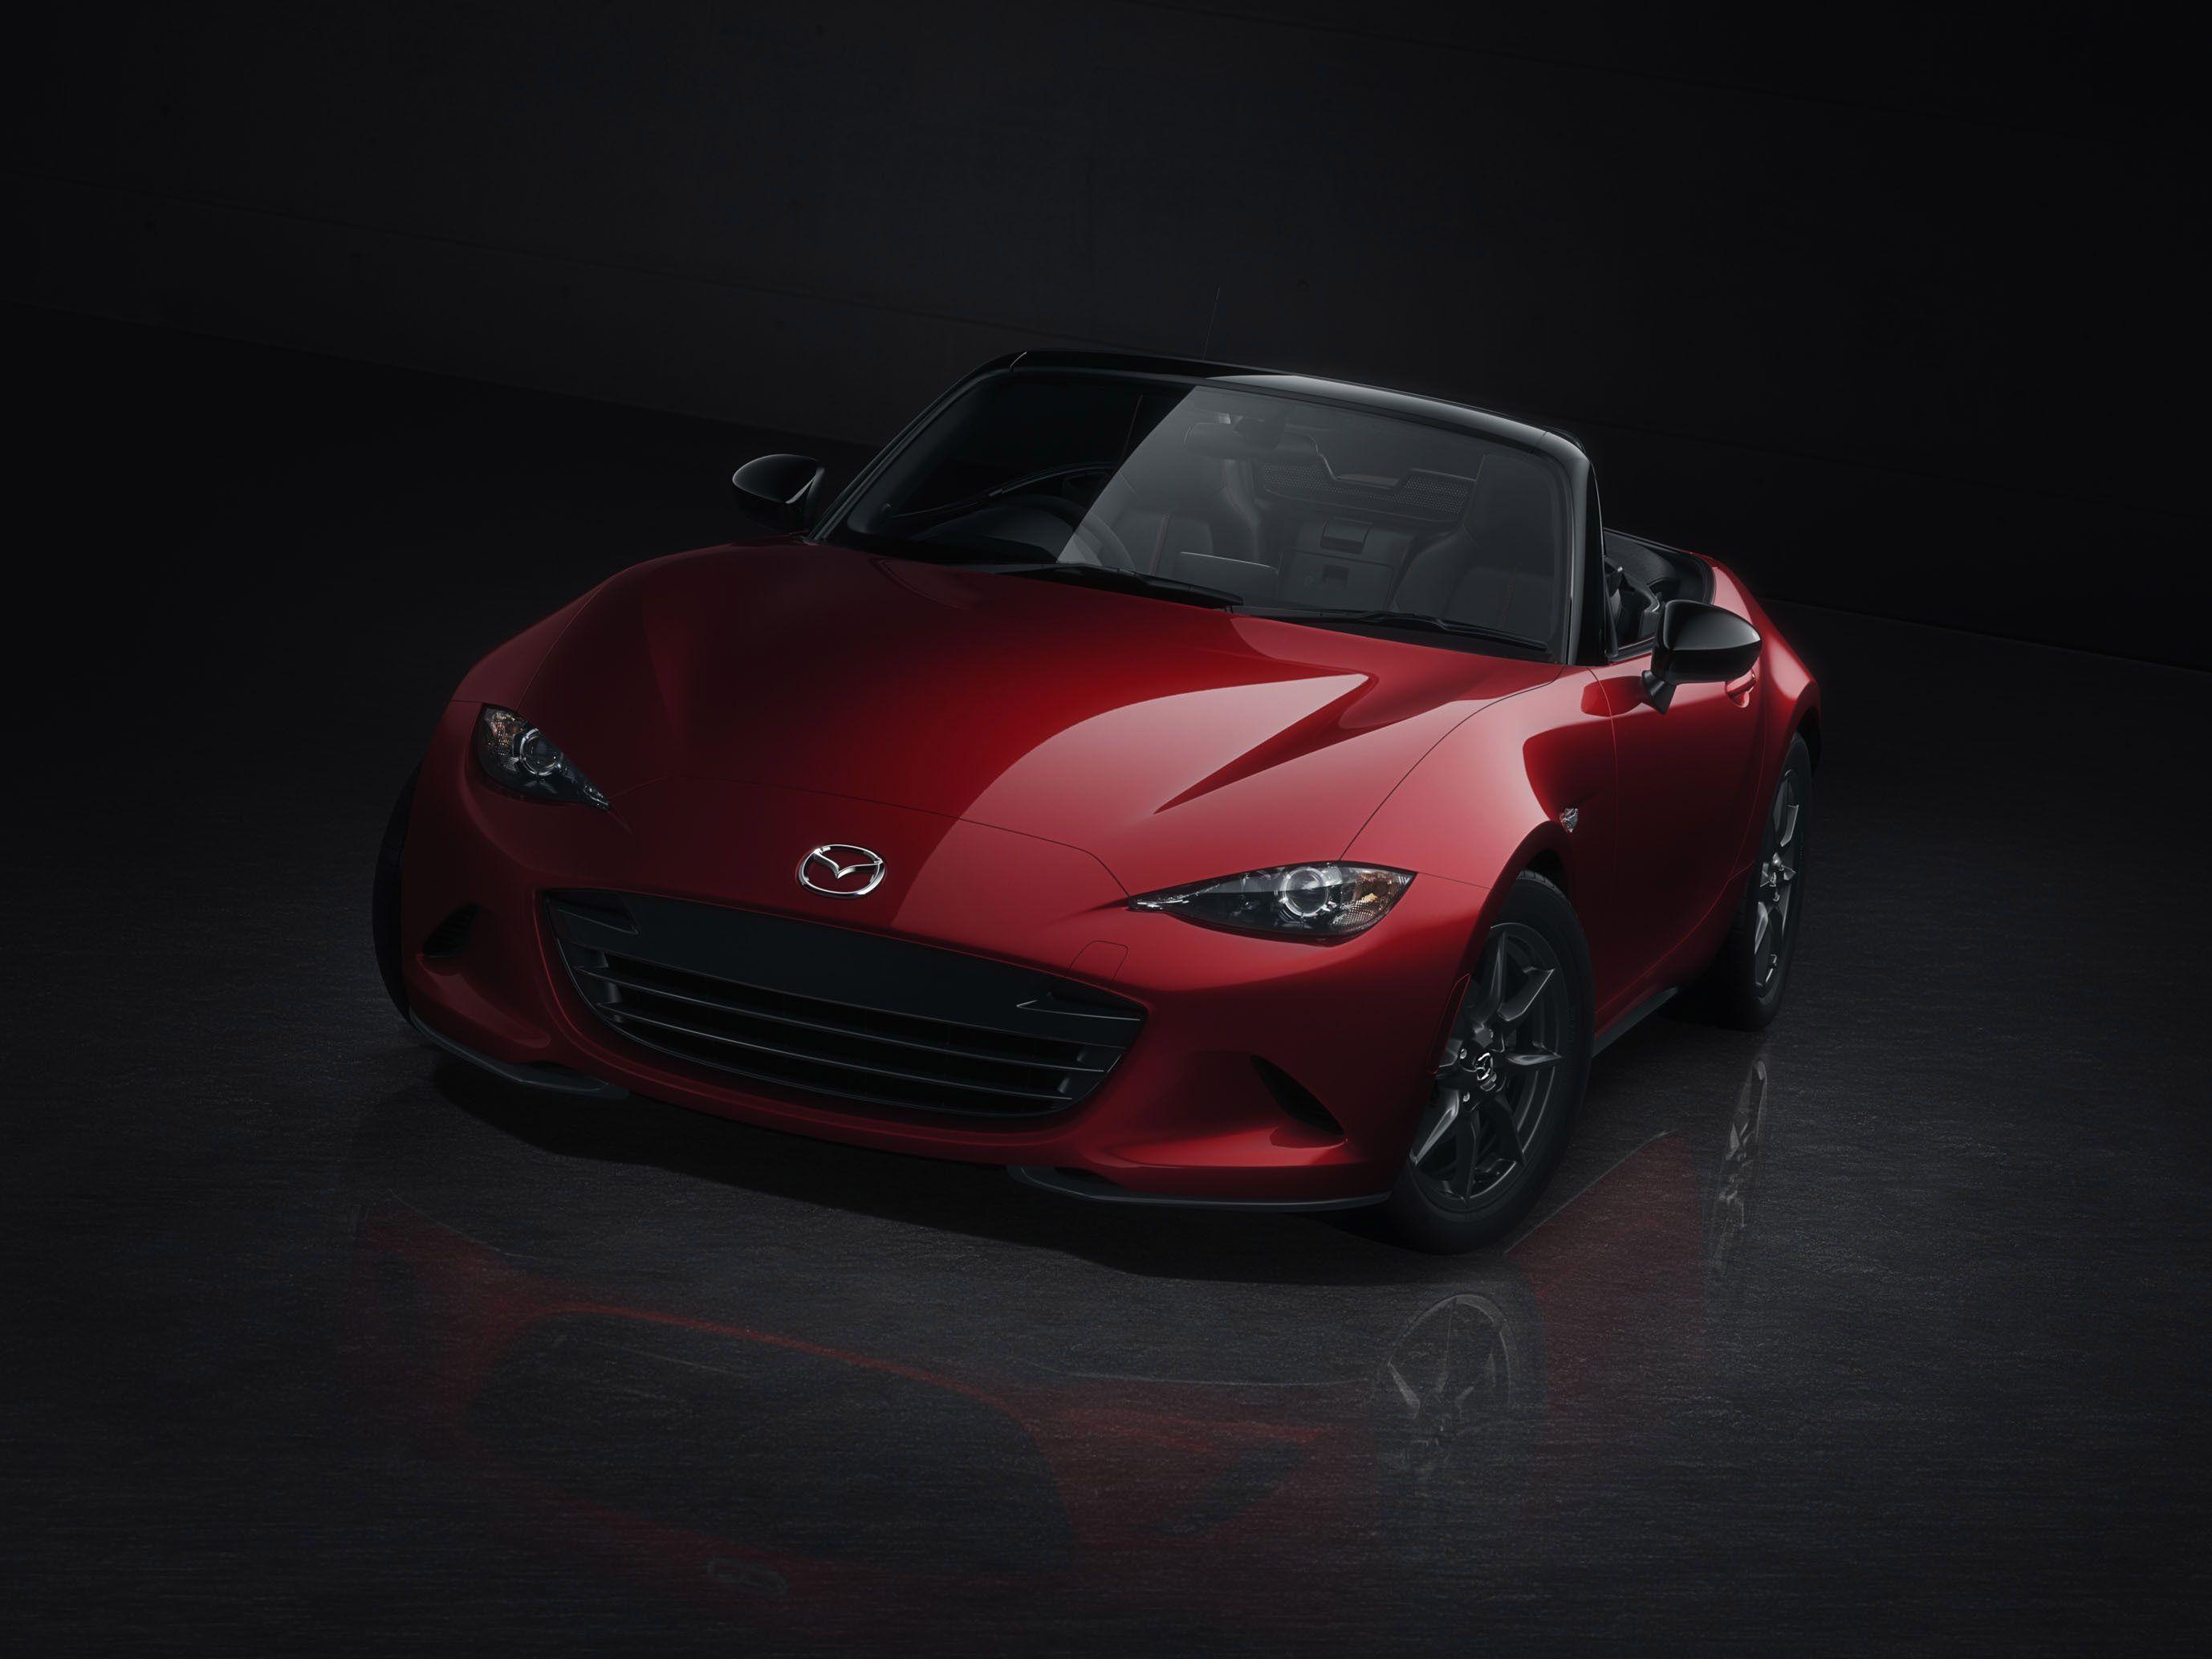 Mazda Mx 5 Wallpapers Top Free Mazda Mx 5 Backgrounds Images, Photos, Reviews